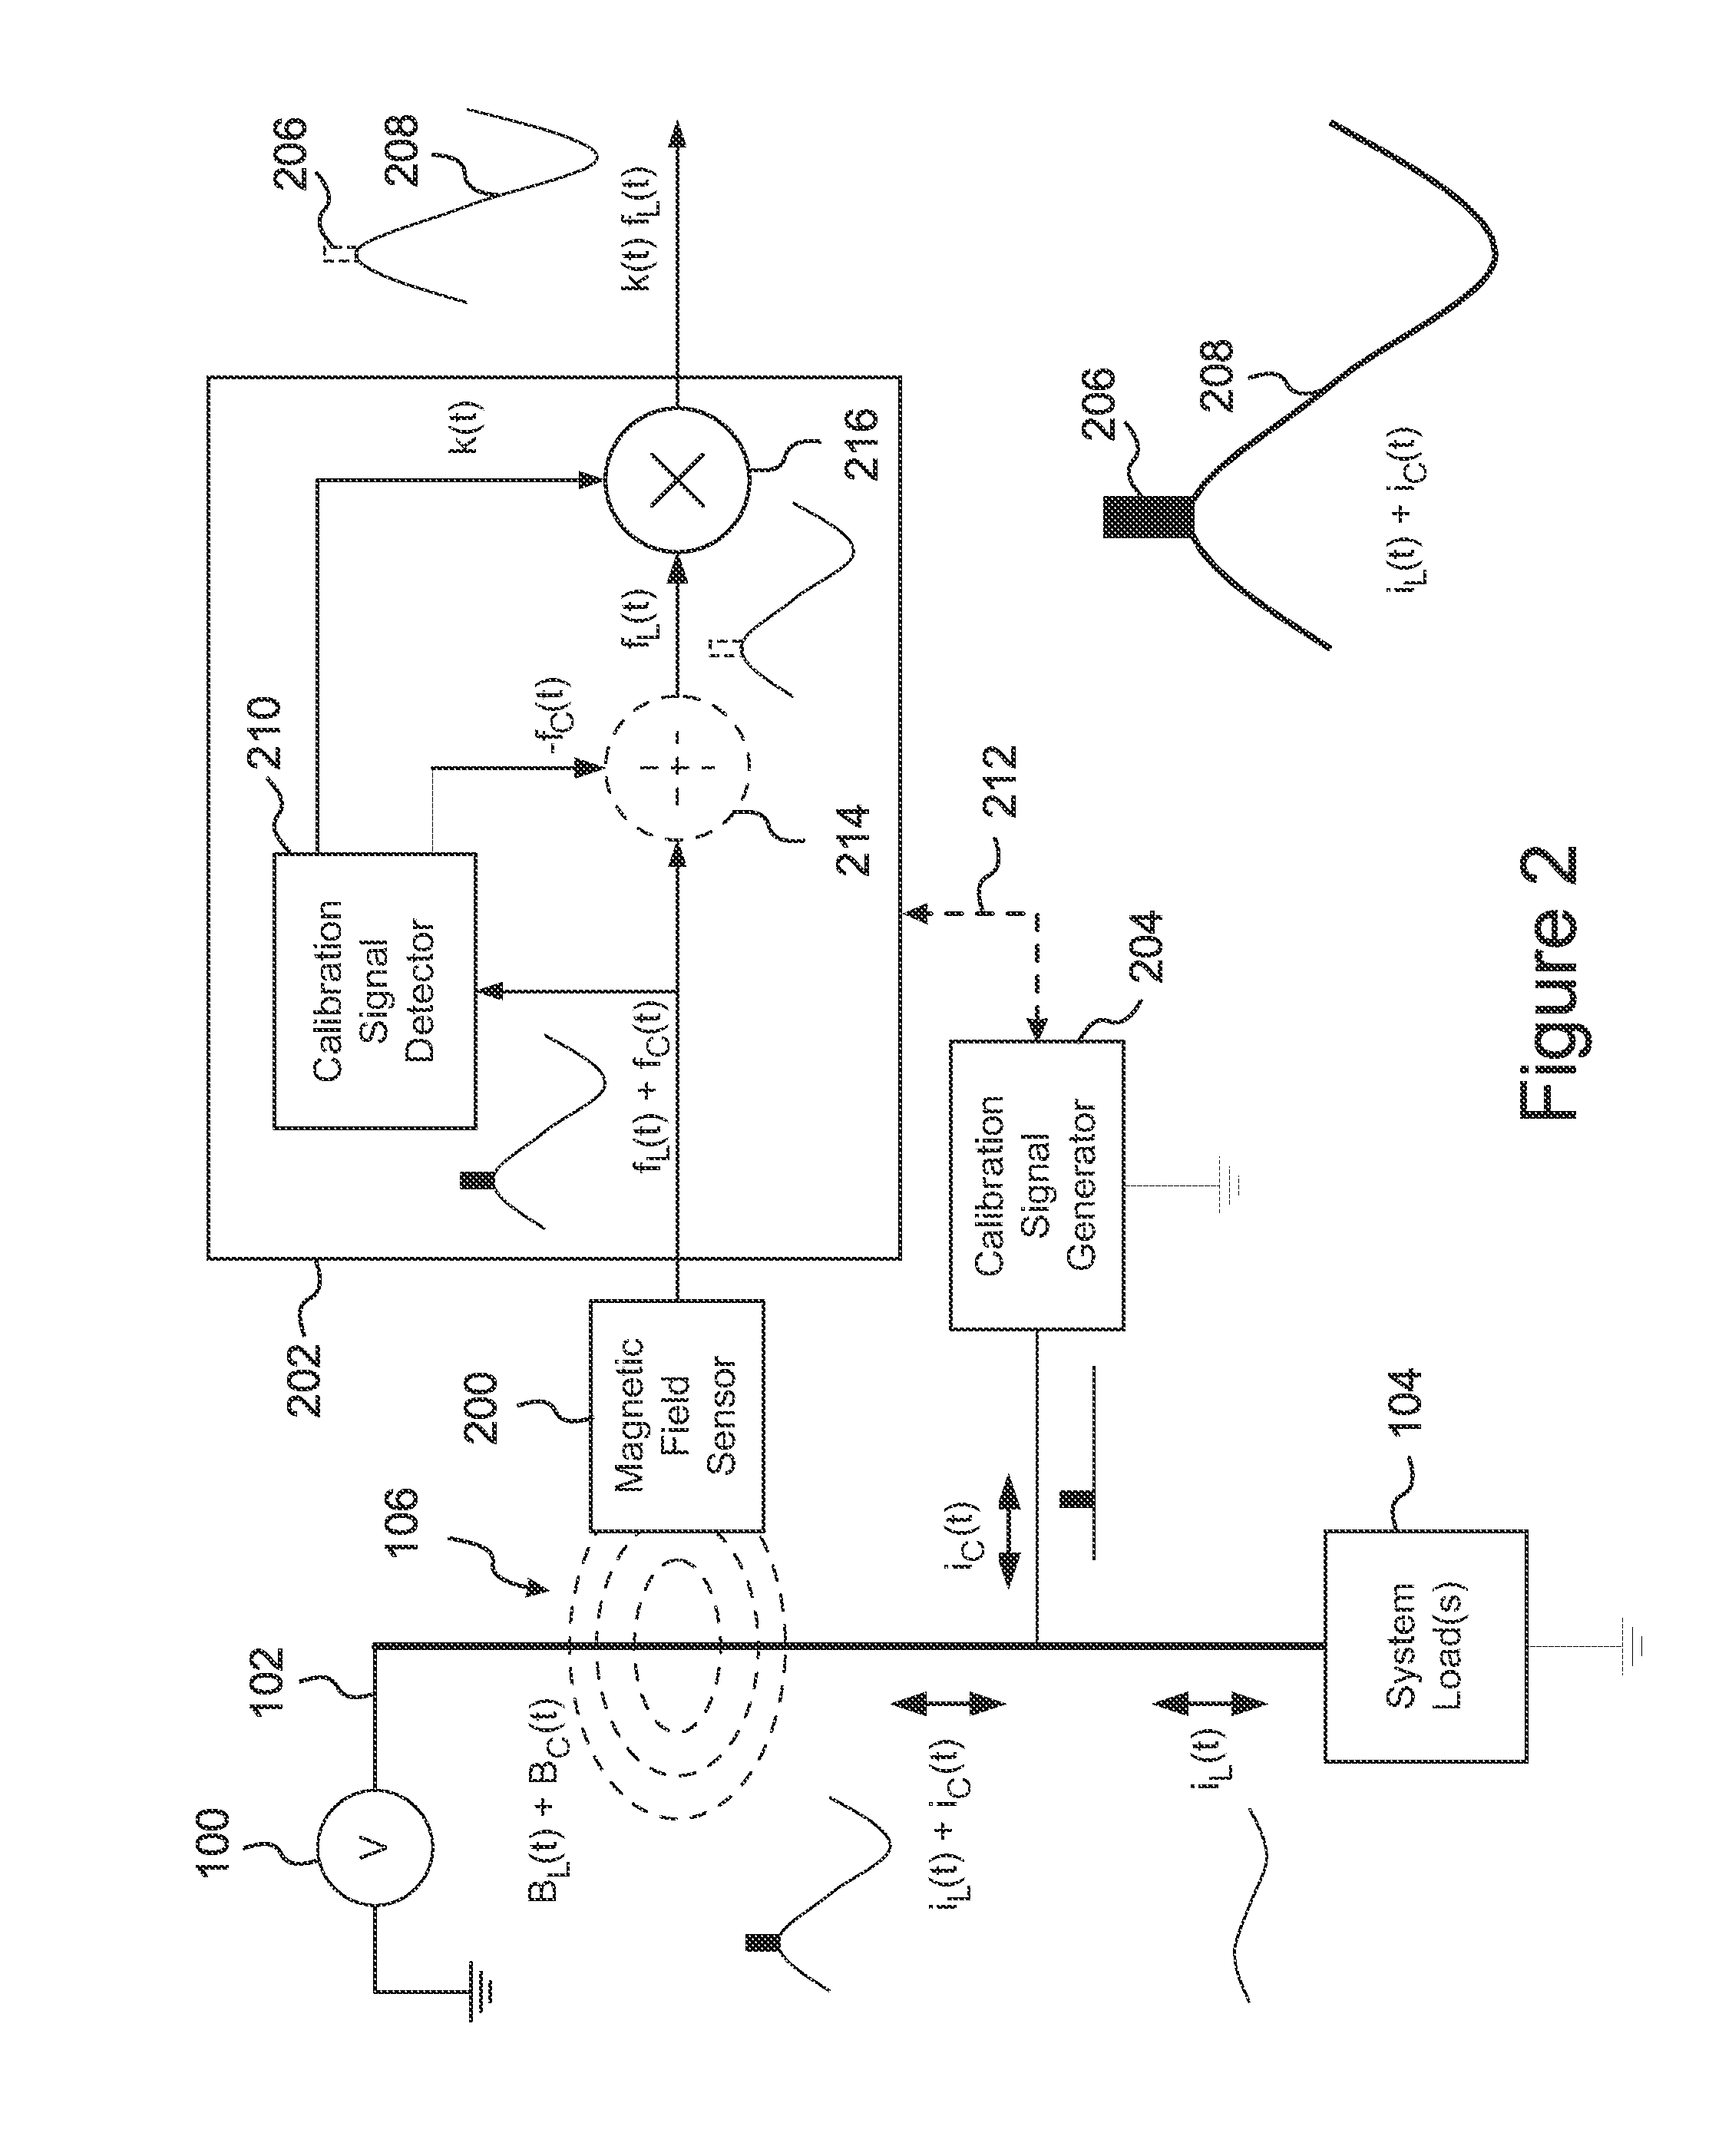 Apparatus for calibrated non-invasive measurement of electrical current